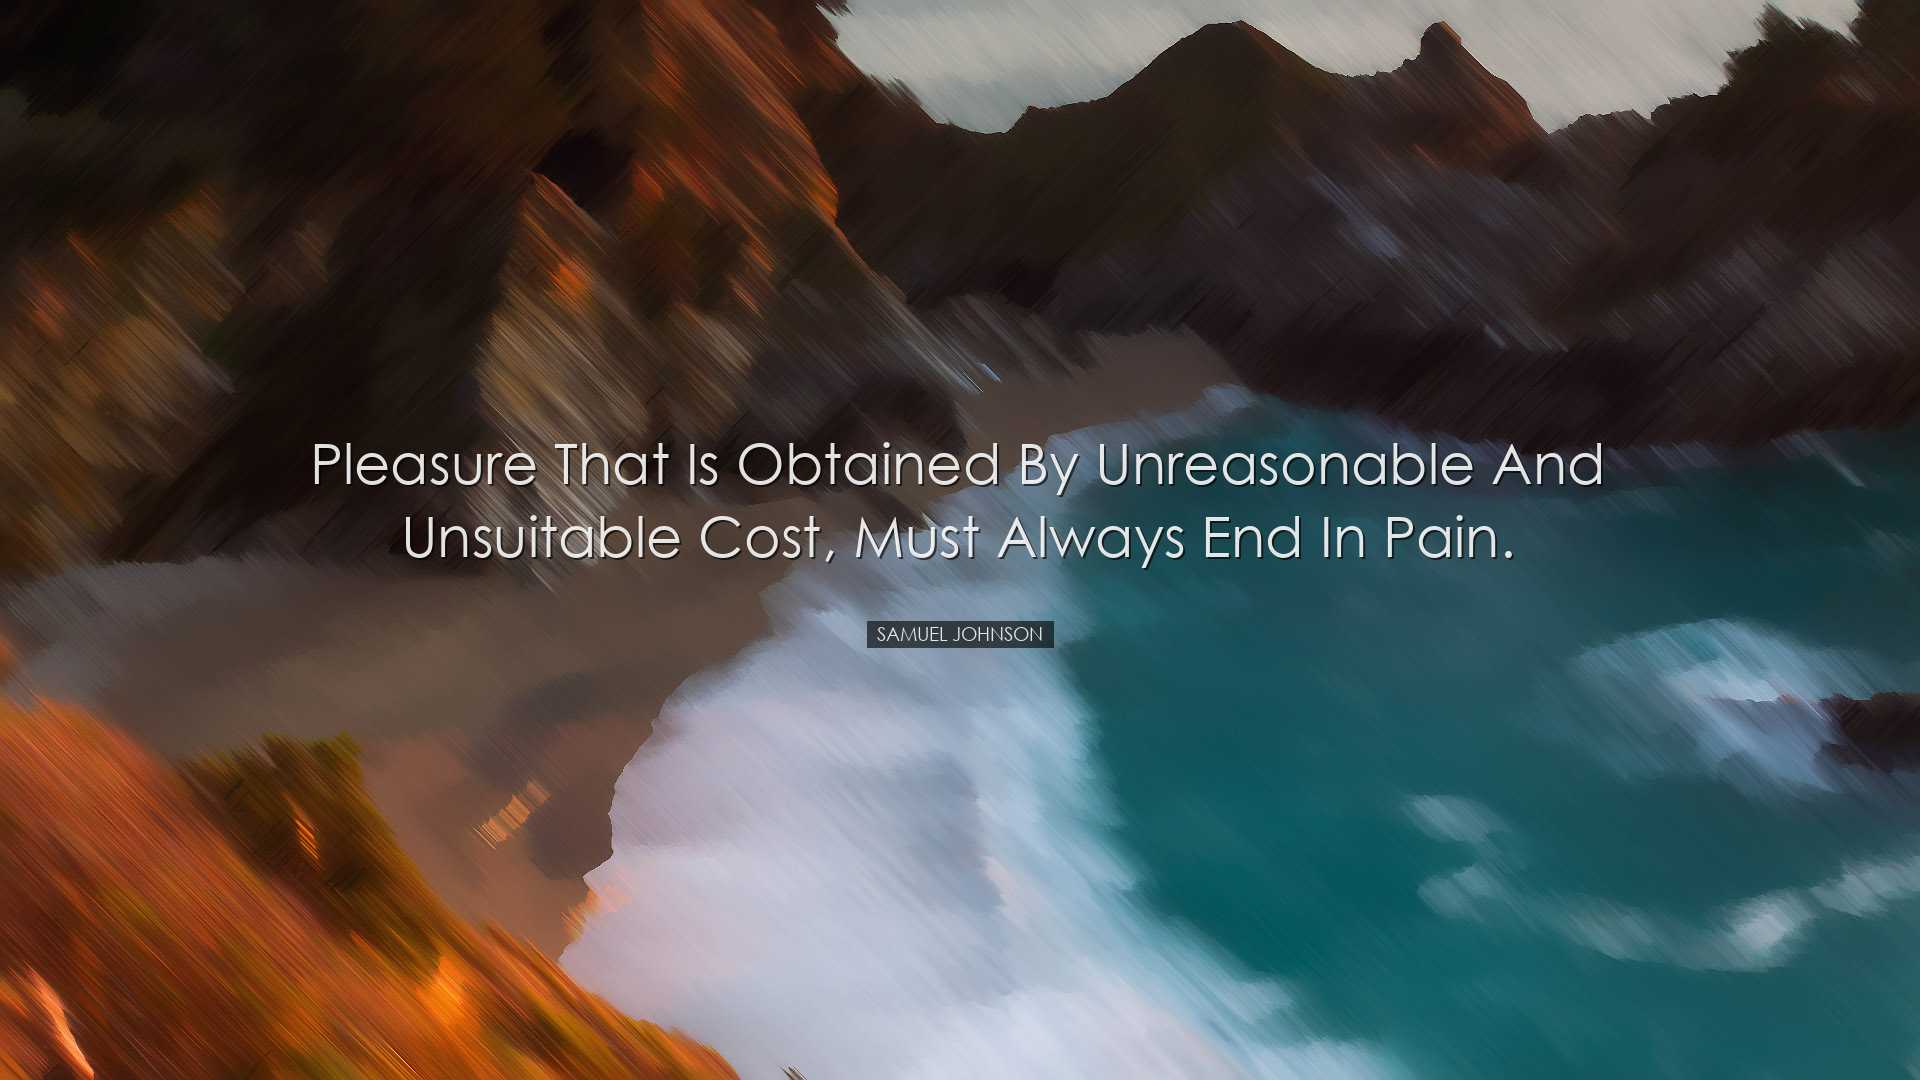 Pleasure that is obtained by unreasonable and unsuitable cost, mus